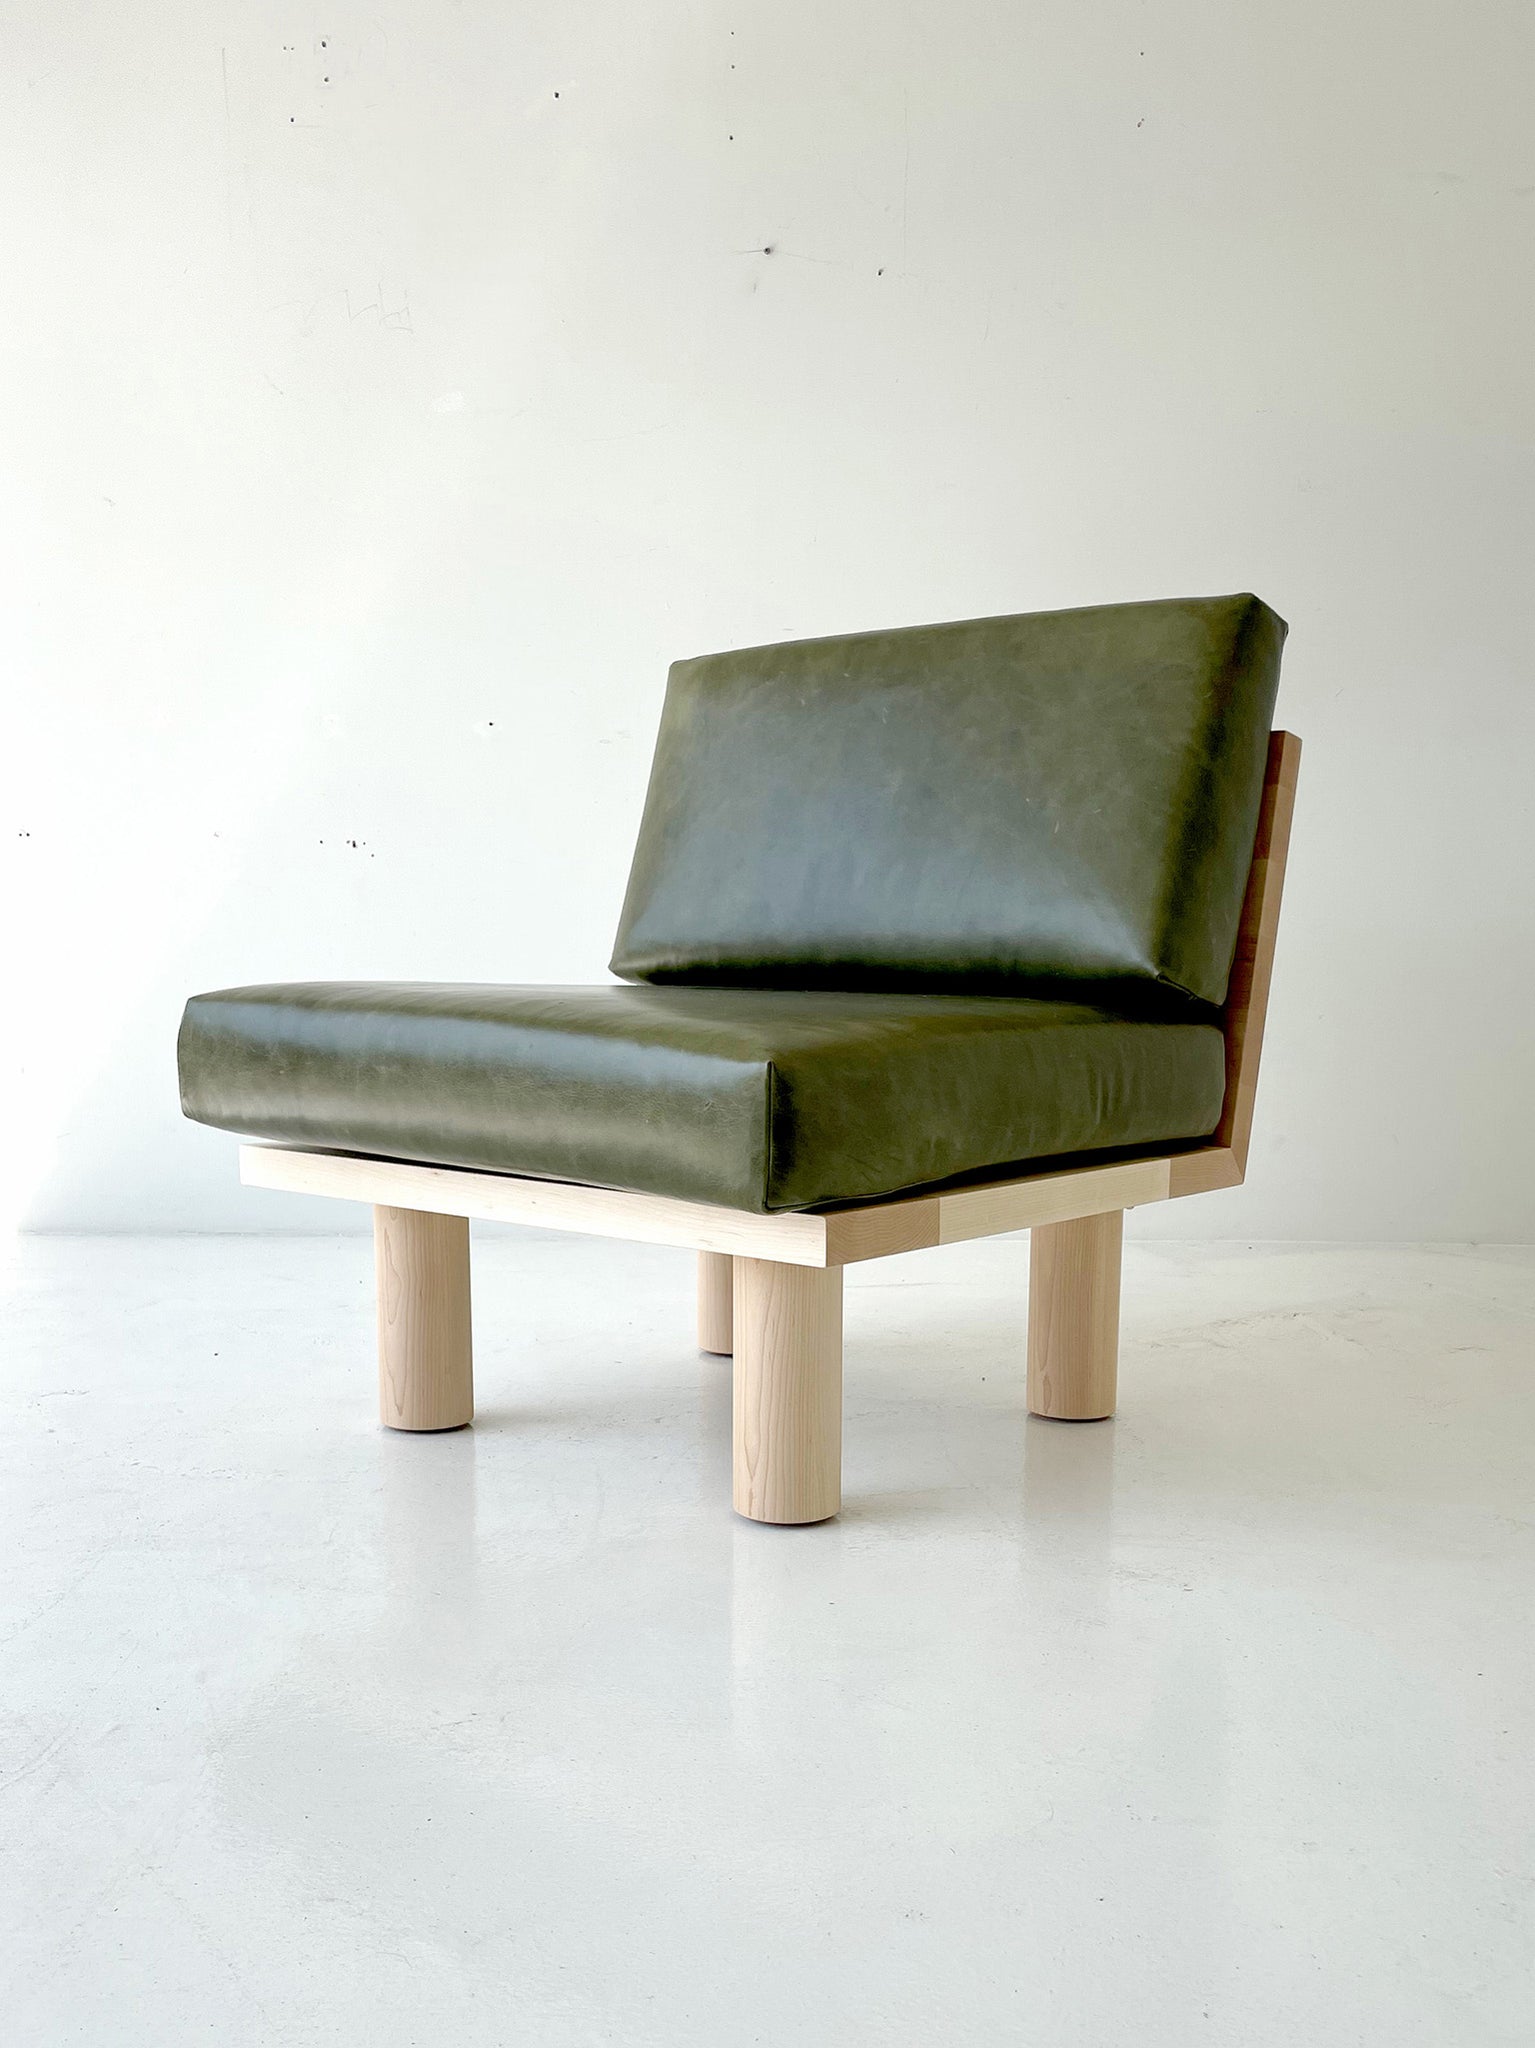  Turned Leg Suelo Side Chair In Leather And Maple - 3021, 07